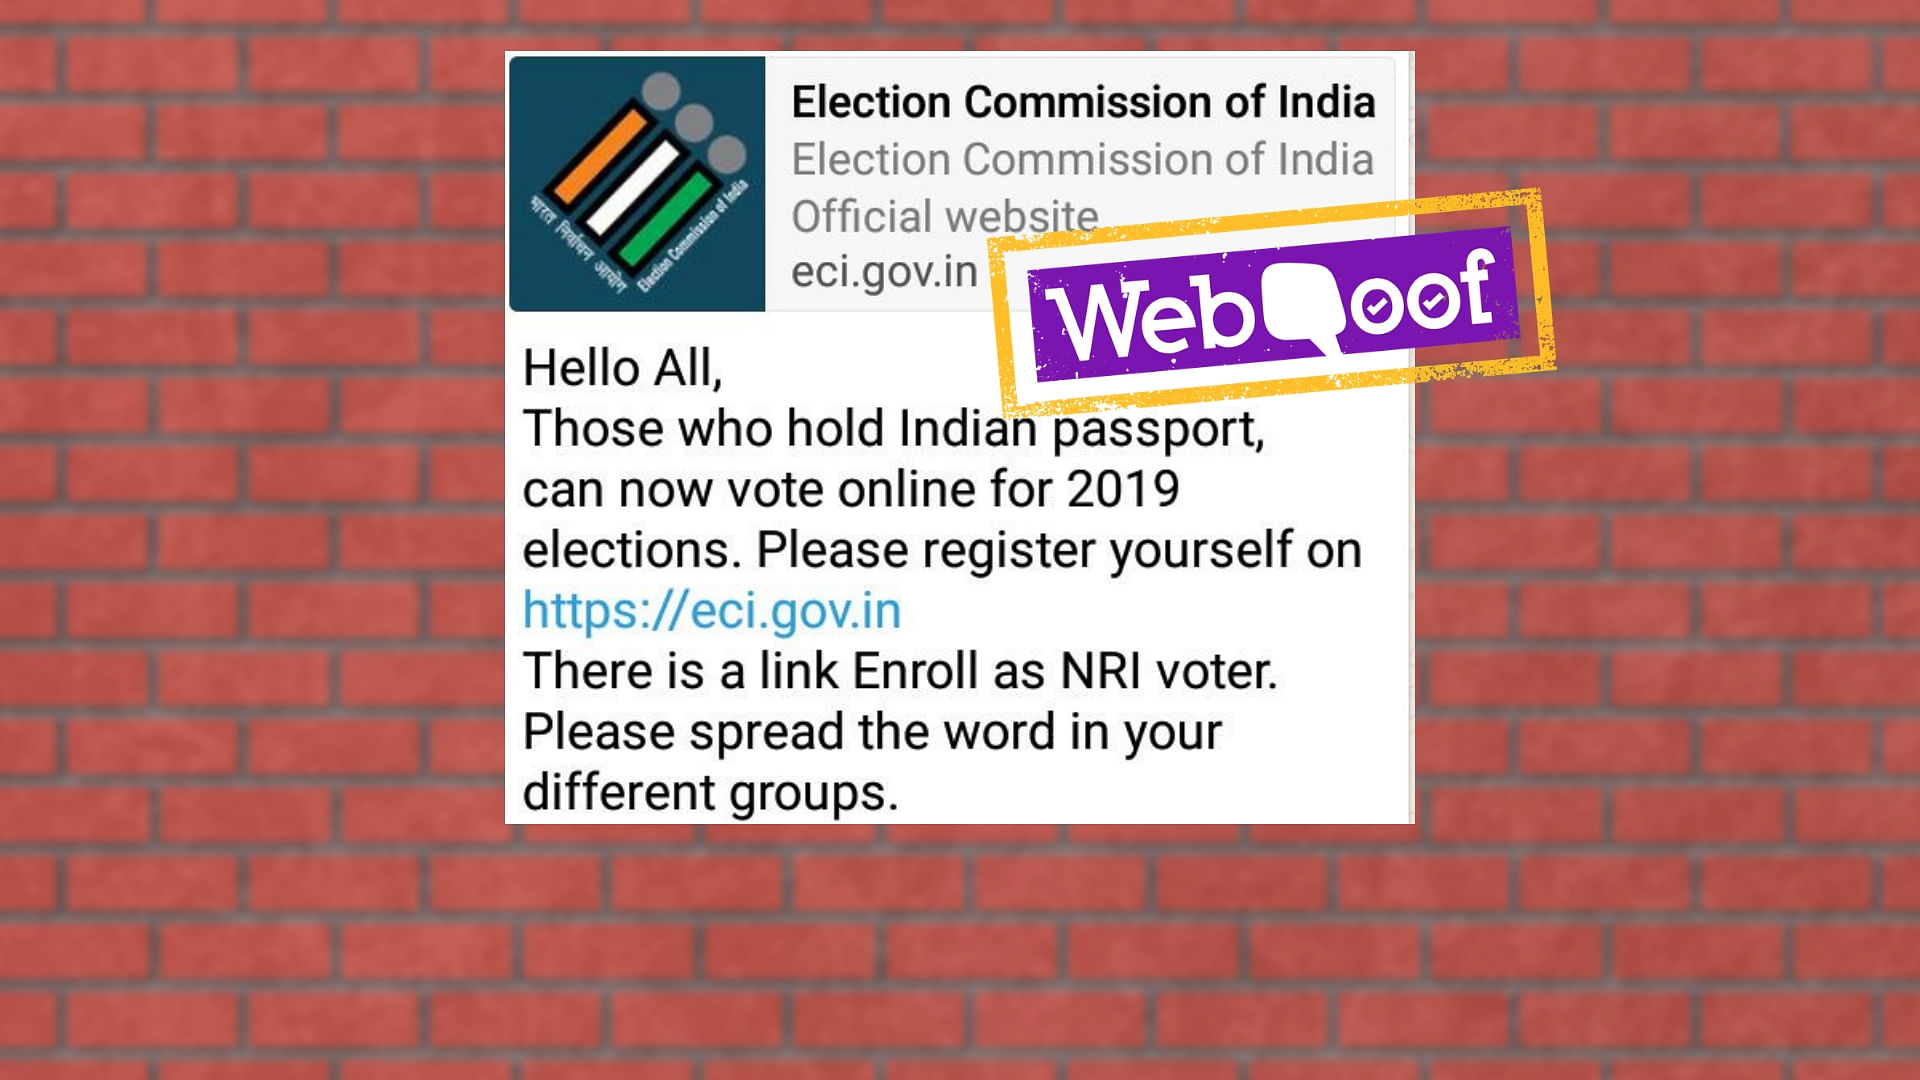 No, NRI voters cannot vote online in the Lok Sabha elections 2019 as has been claimed by a viral image.